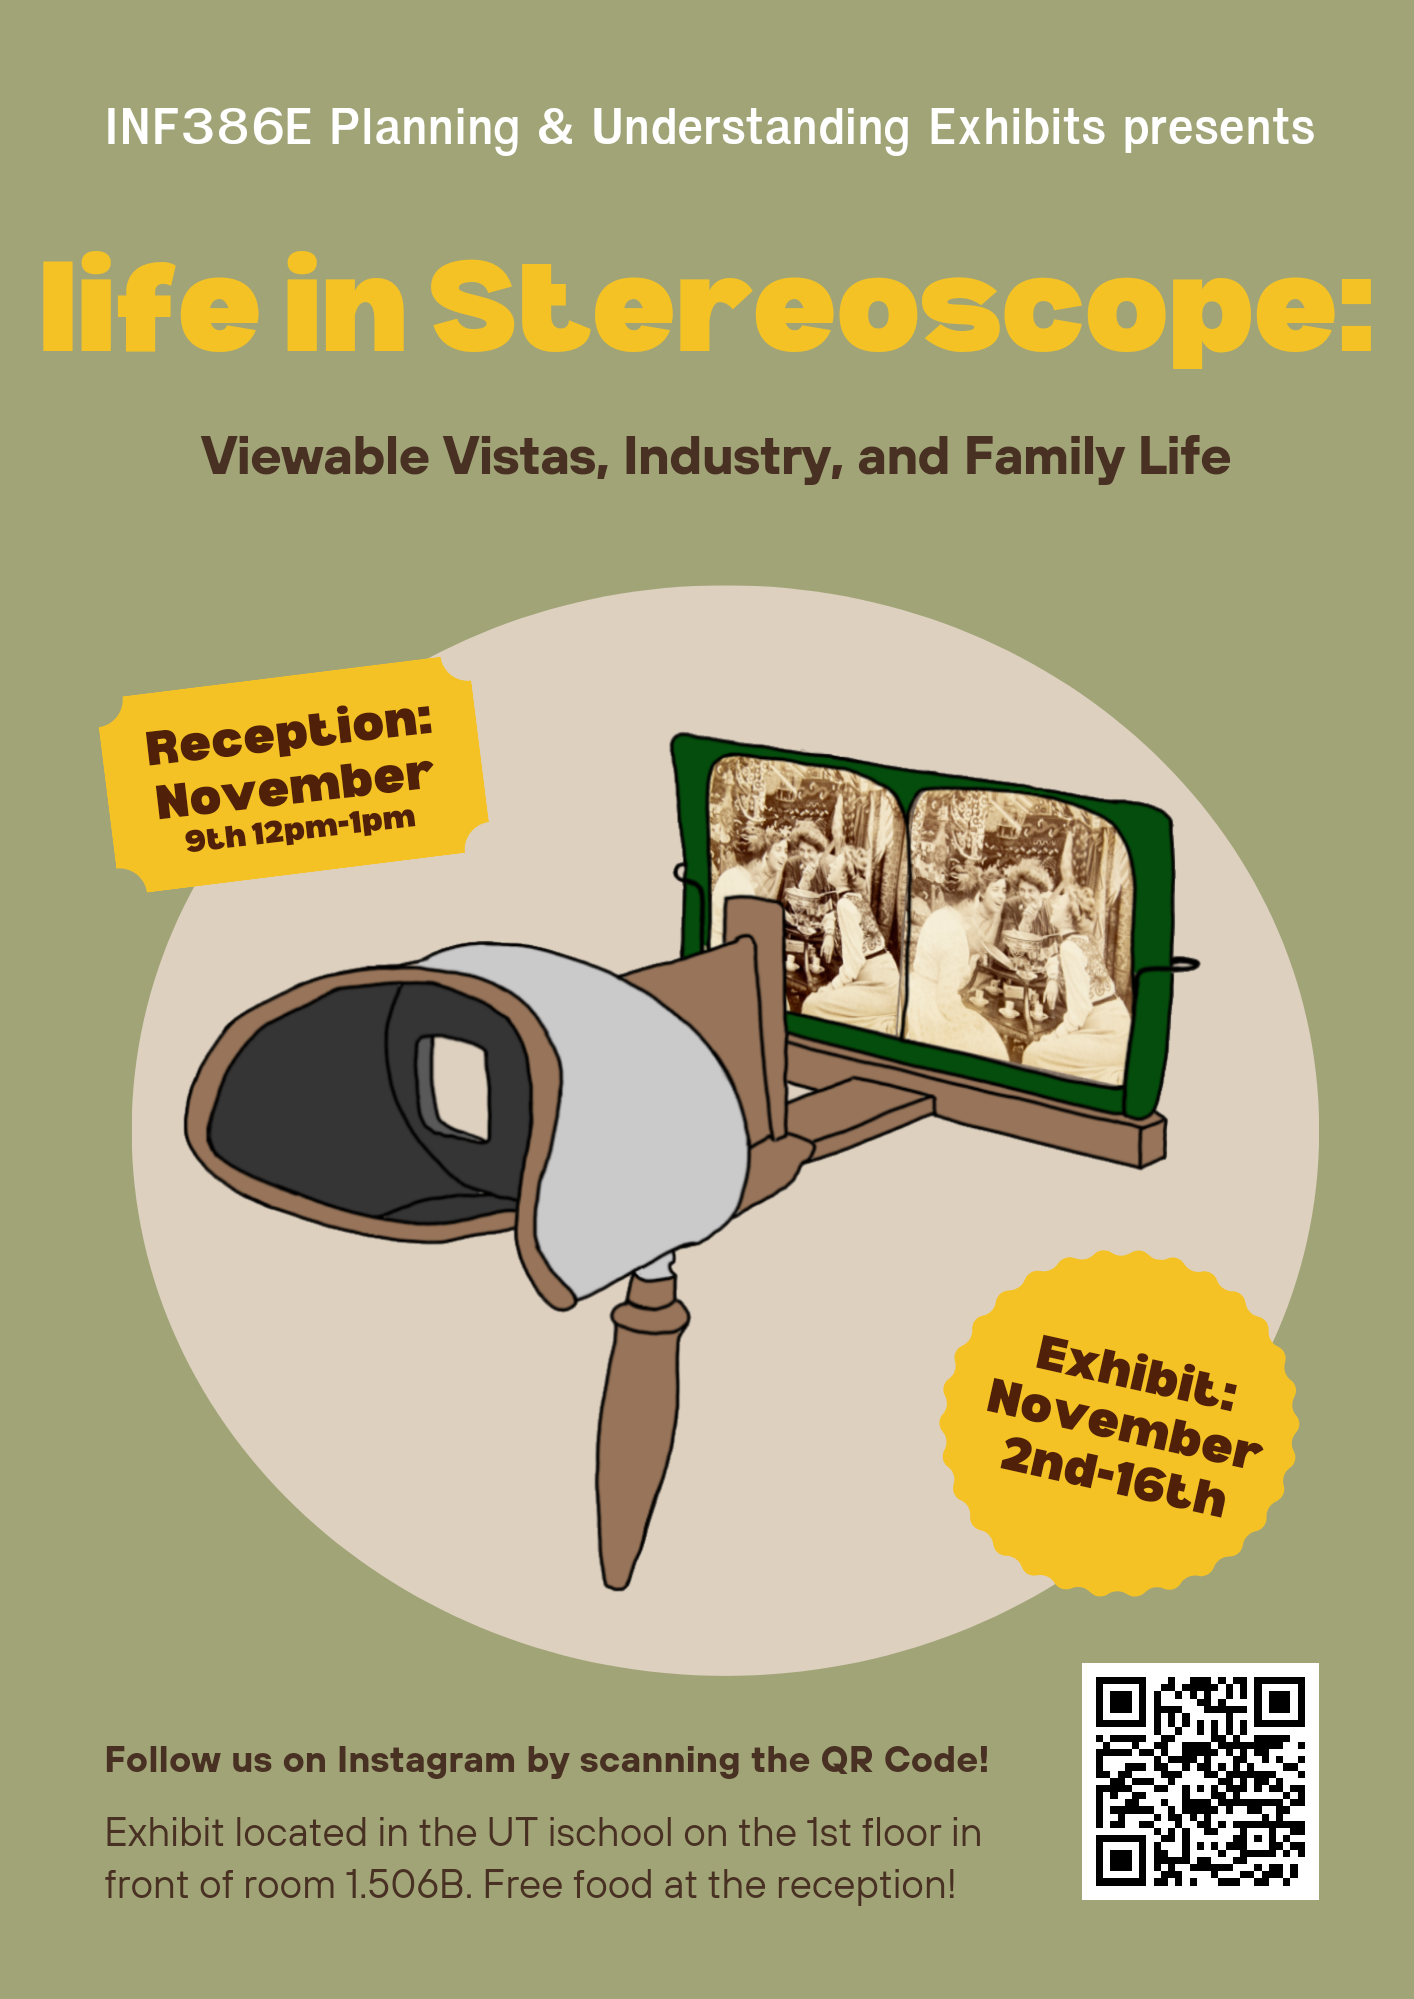 Life in Stereoscope: Viewable Vistas, Industry, and Family Life